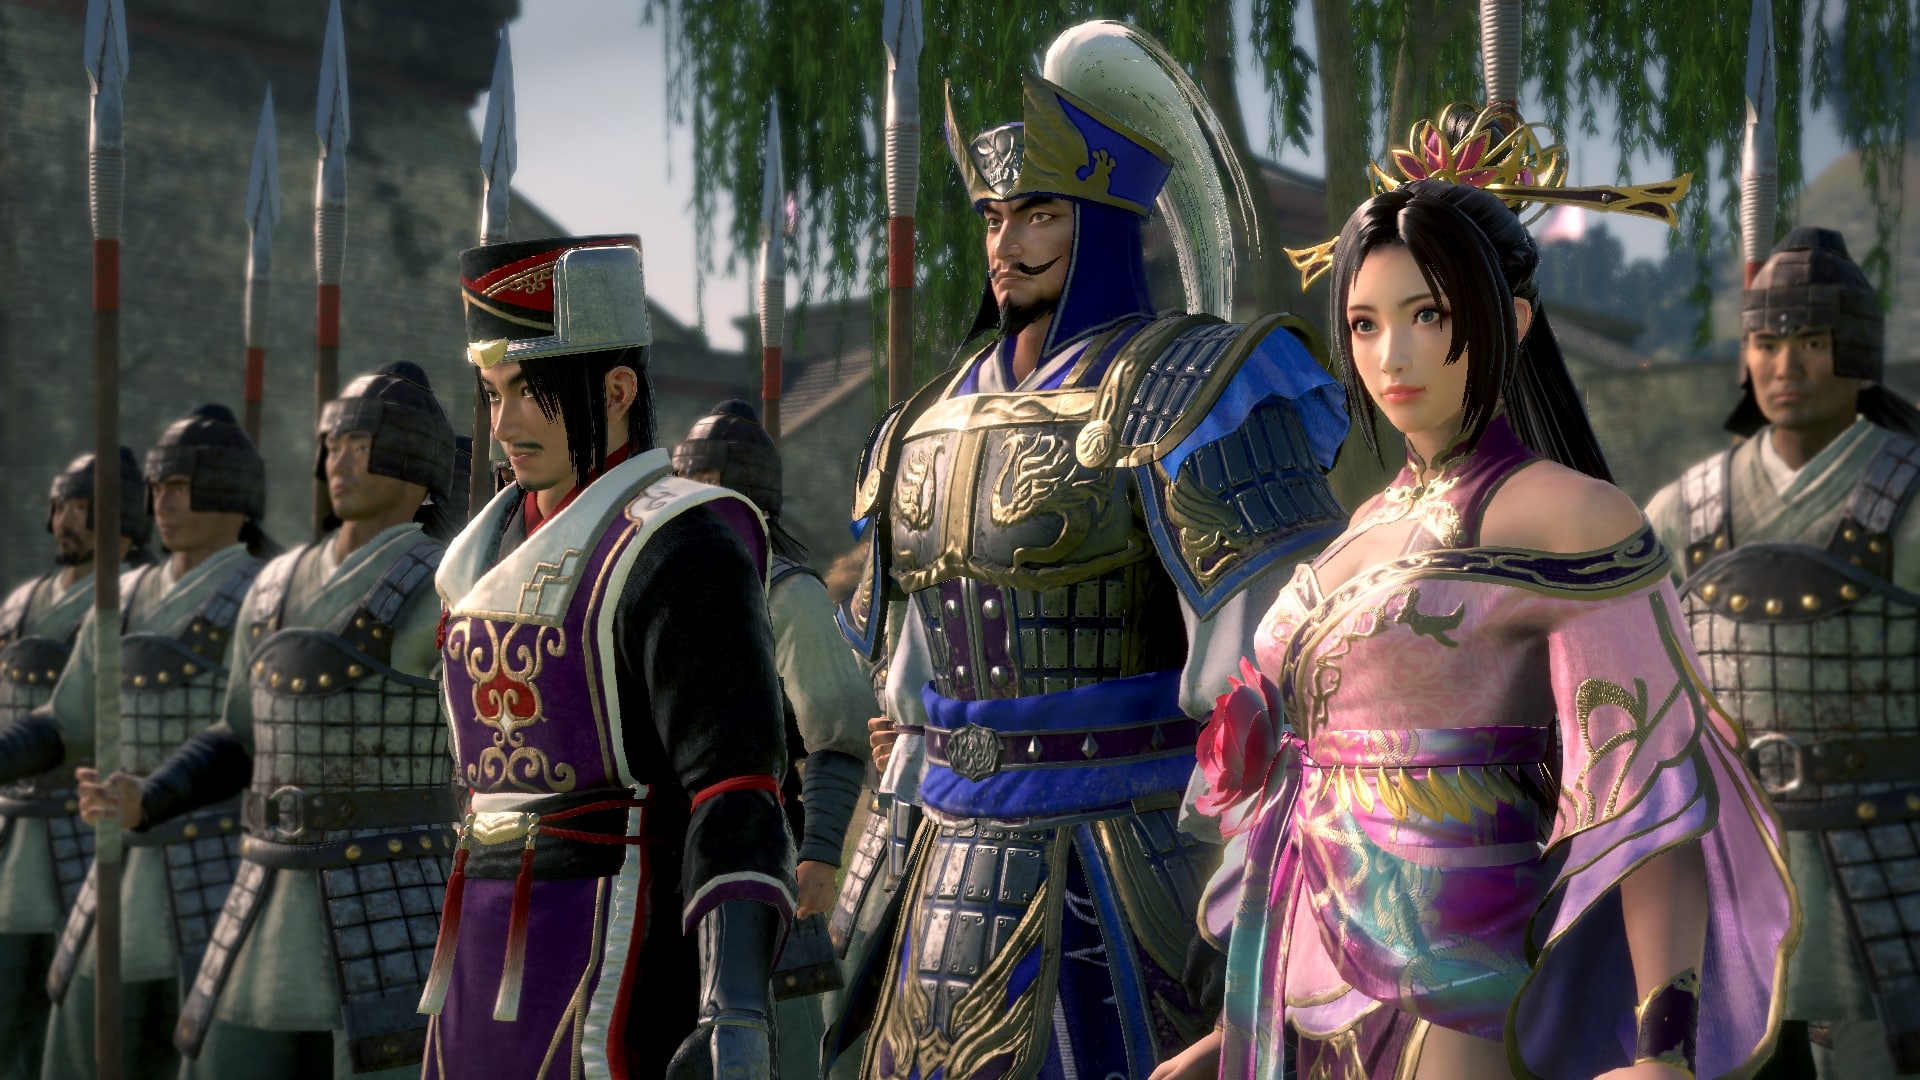 Dynasty Warriors 9 Empires demo now available